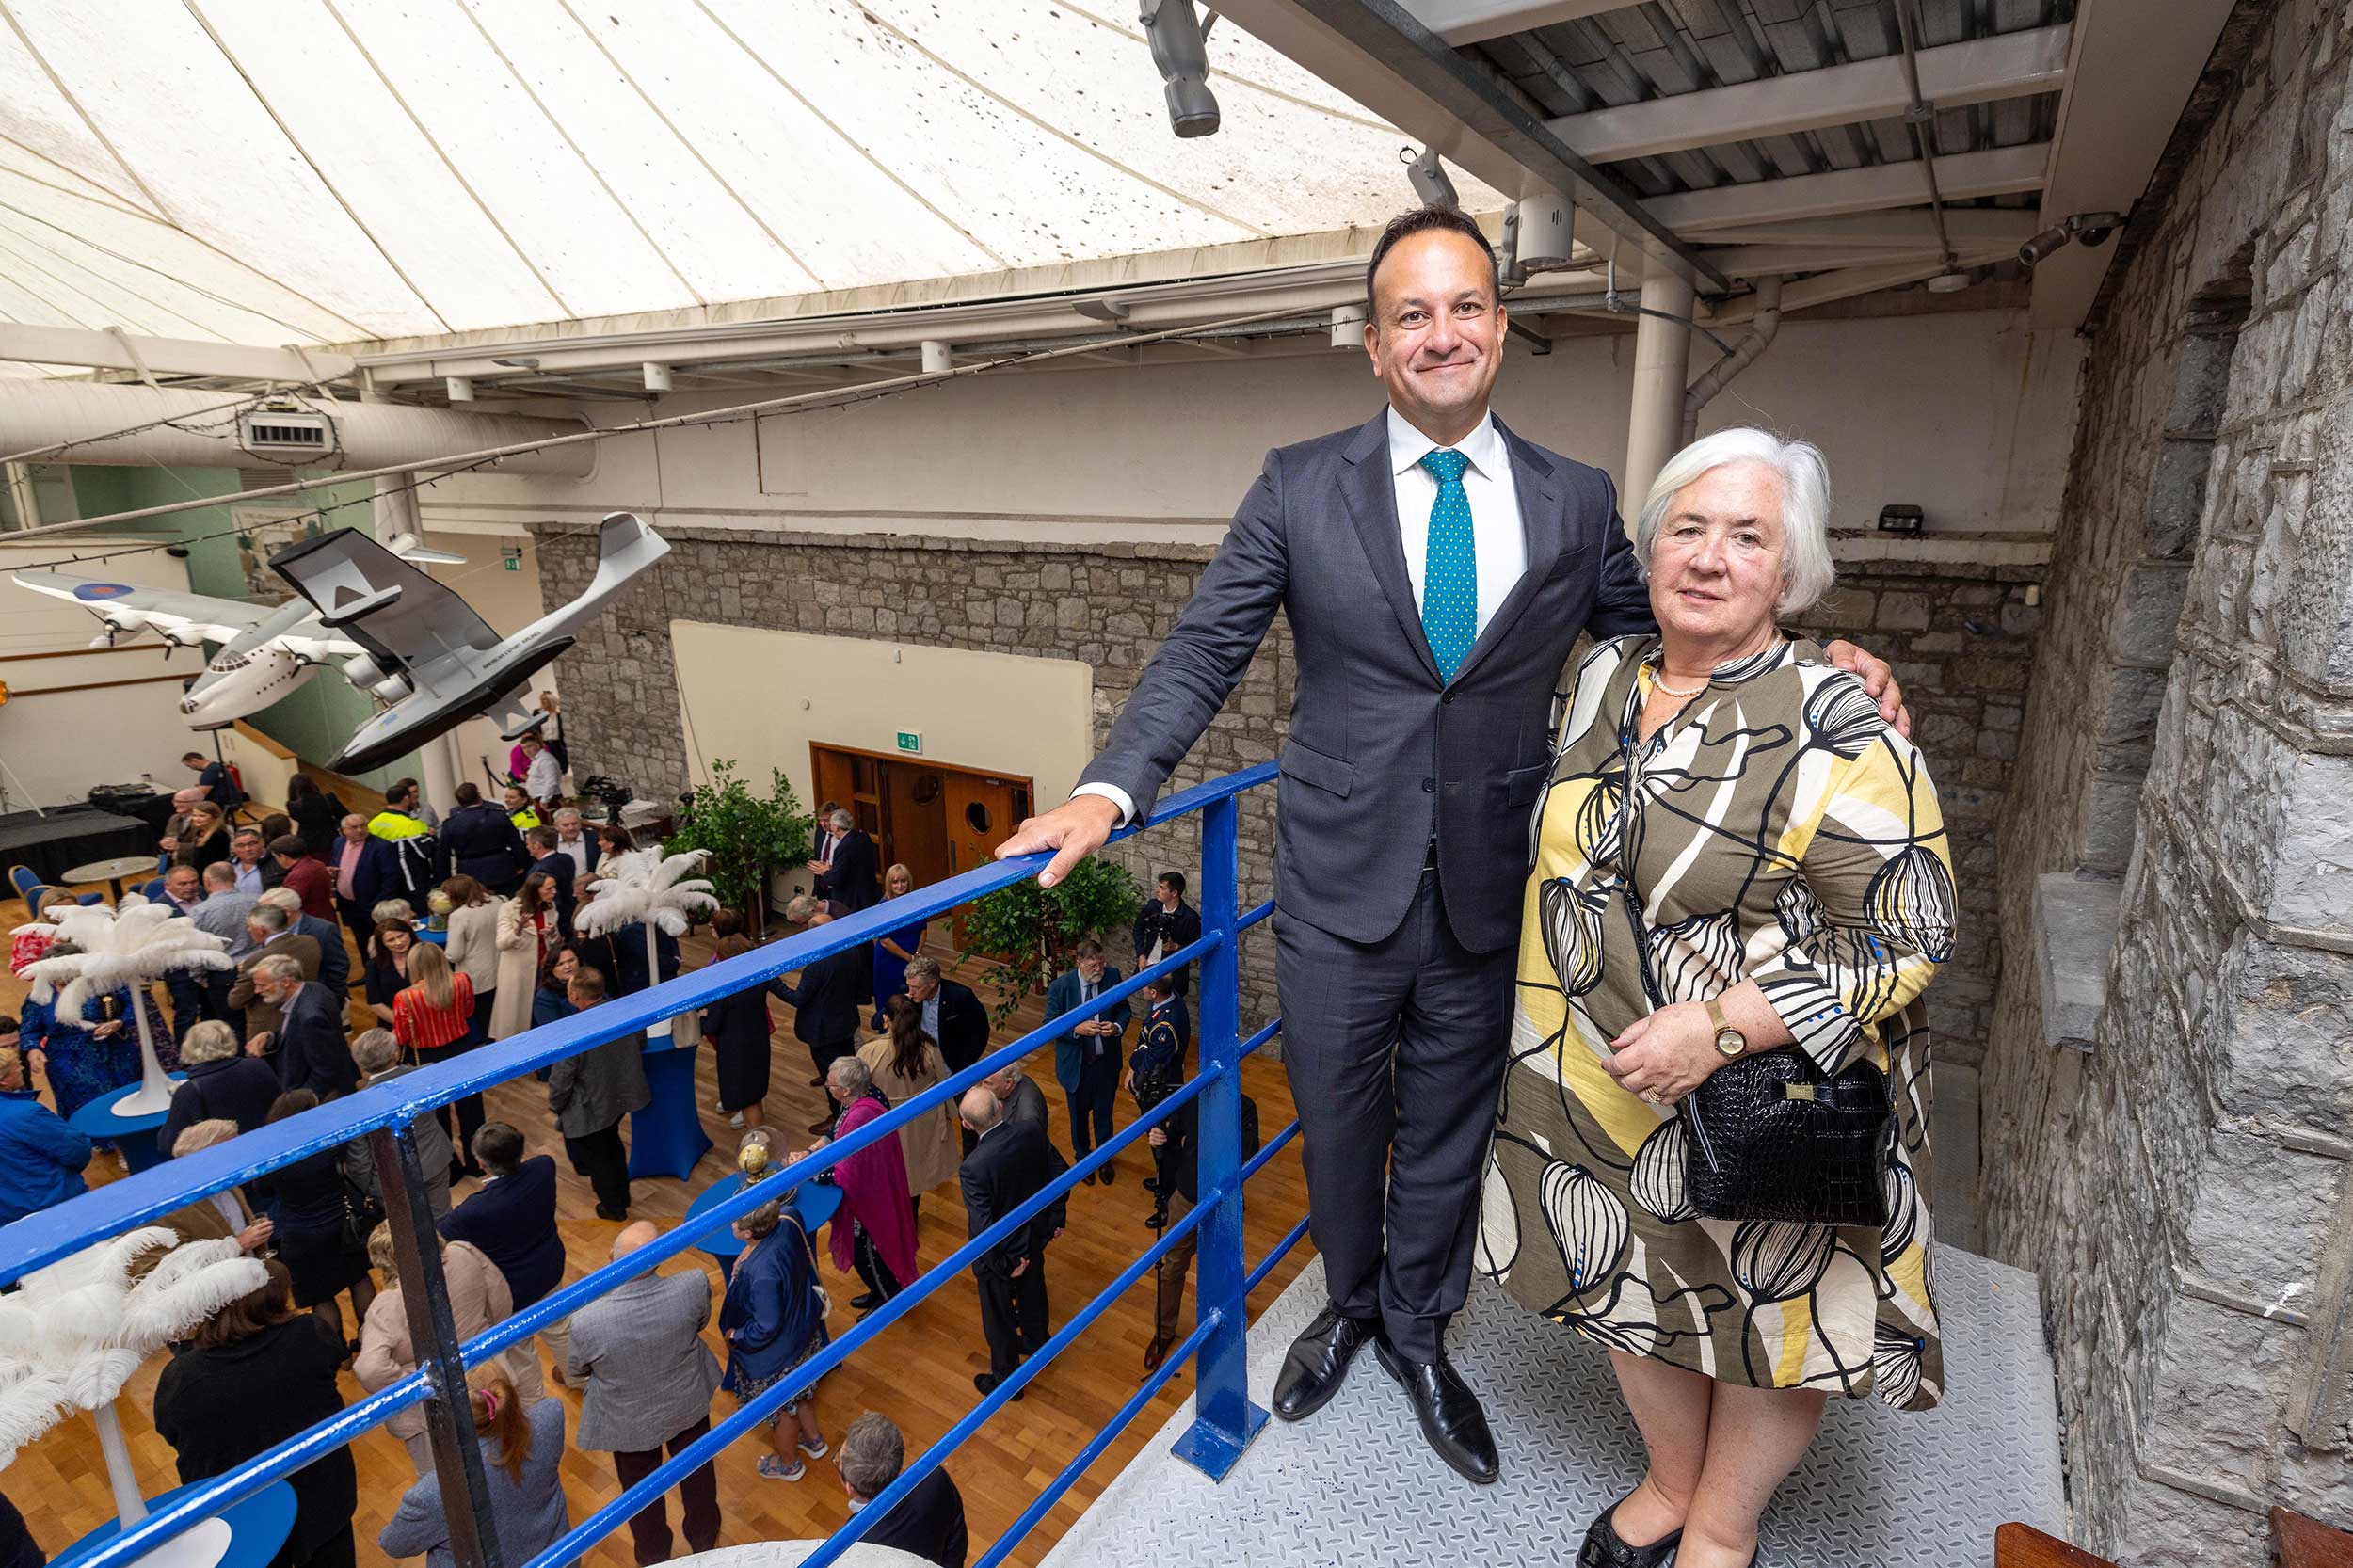 The Taoiseach with Margaret O’Shaughnessy, CEO and Founding Director of Foynes Flying Boat & Maritime Museum. Photo: Arthur Ellis